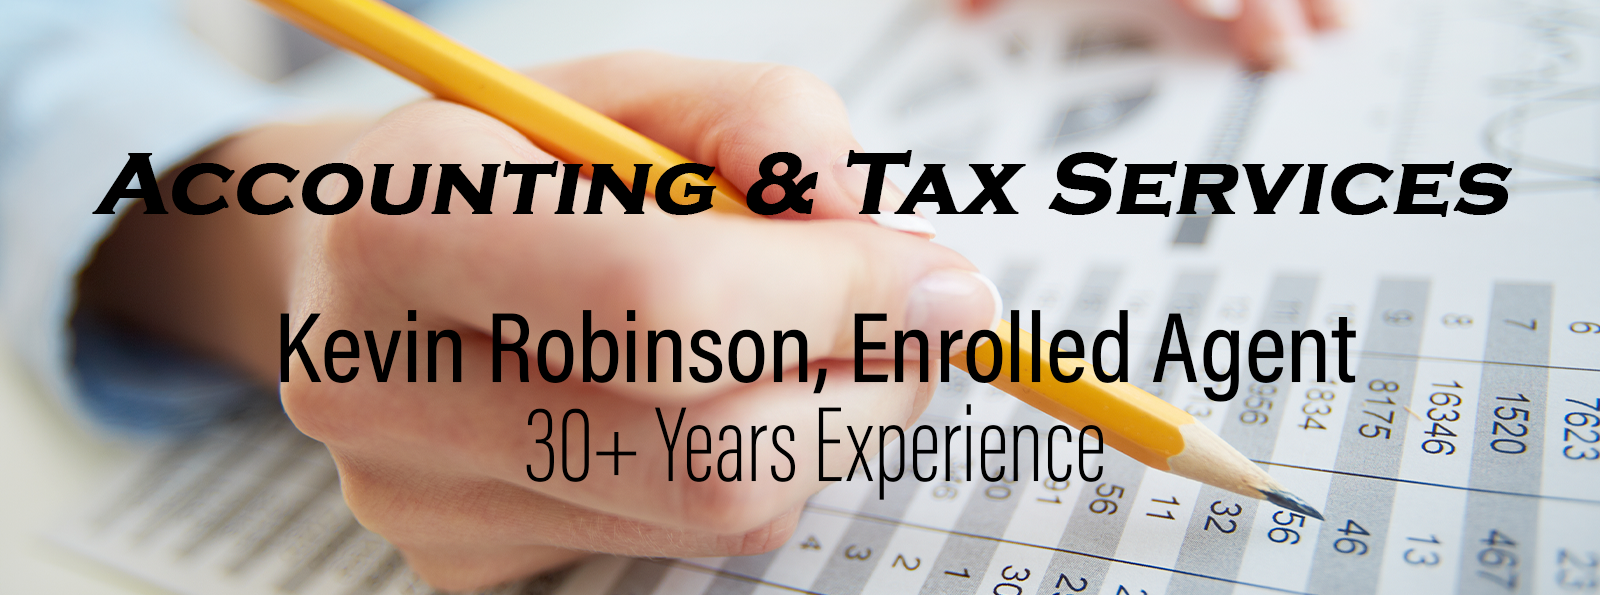 Enrolled Agent Accounting & Tax Services, Hendersonville NC